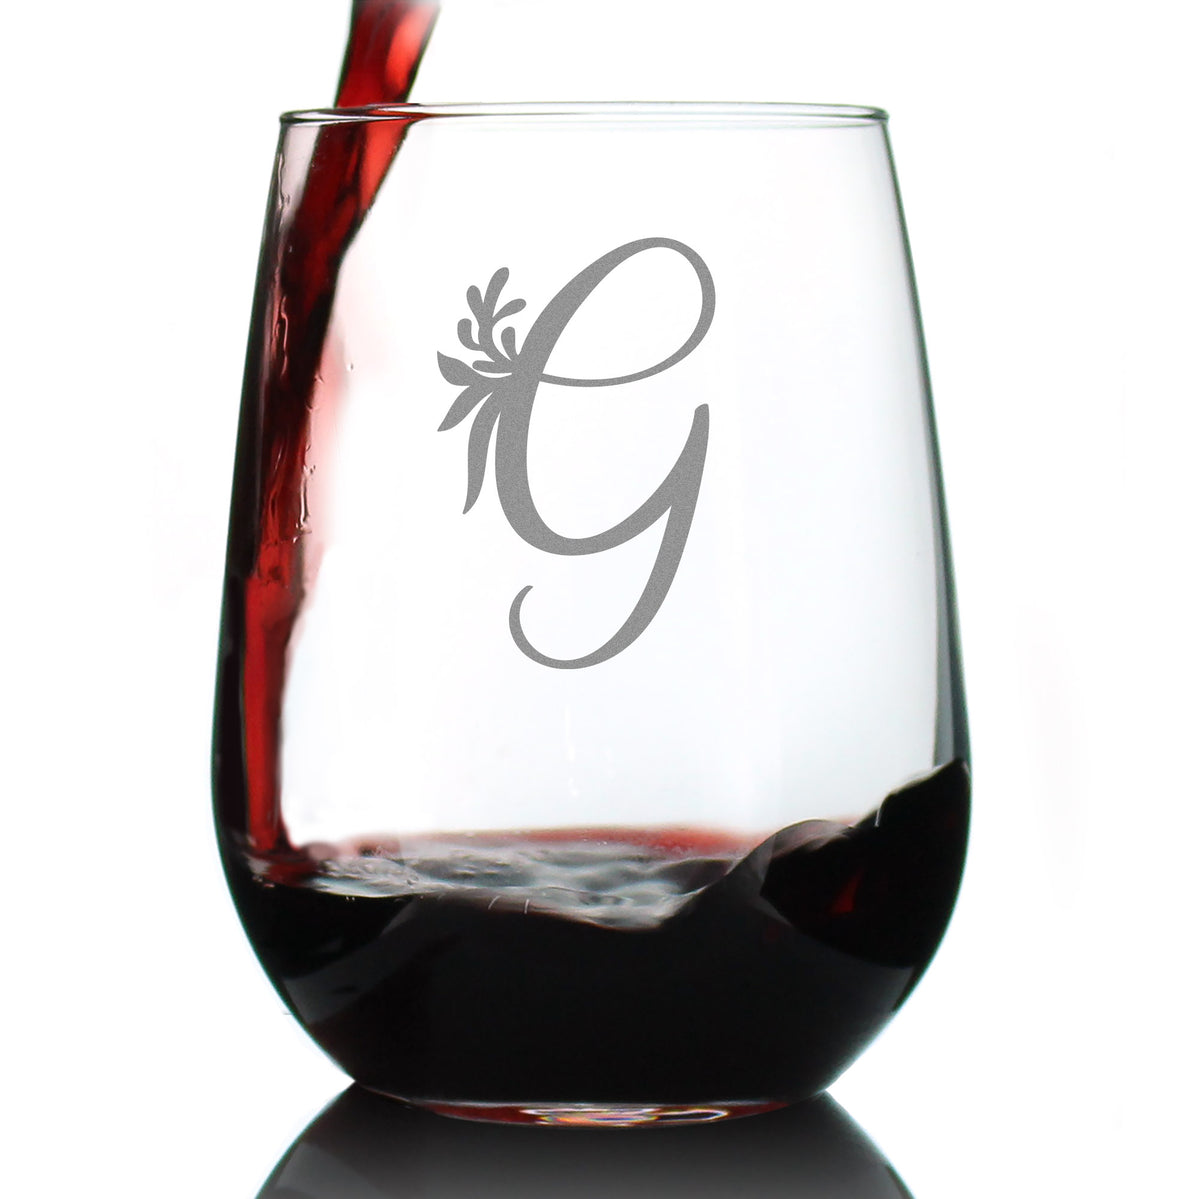 Monogram Floral Letter G - Stemless Wine Glass - Personalized Gifts for Women and Men - Large Engraved 17 Oz Glasses